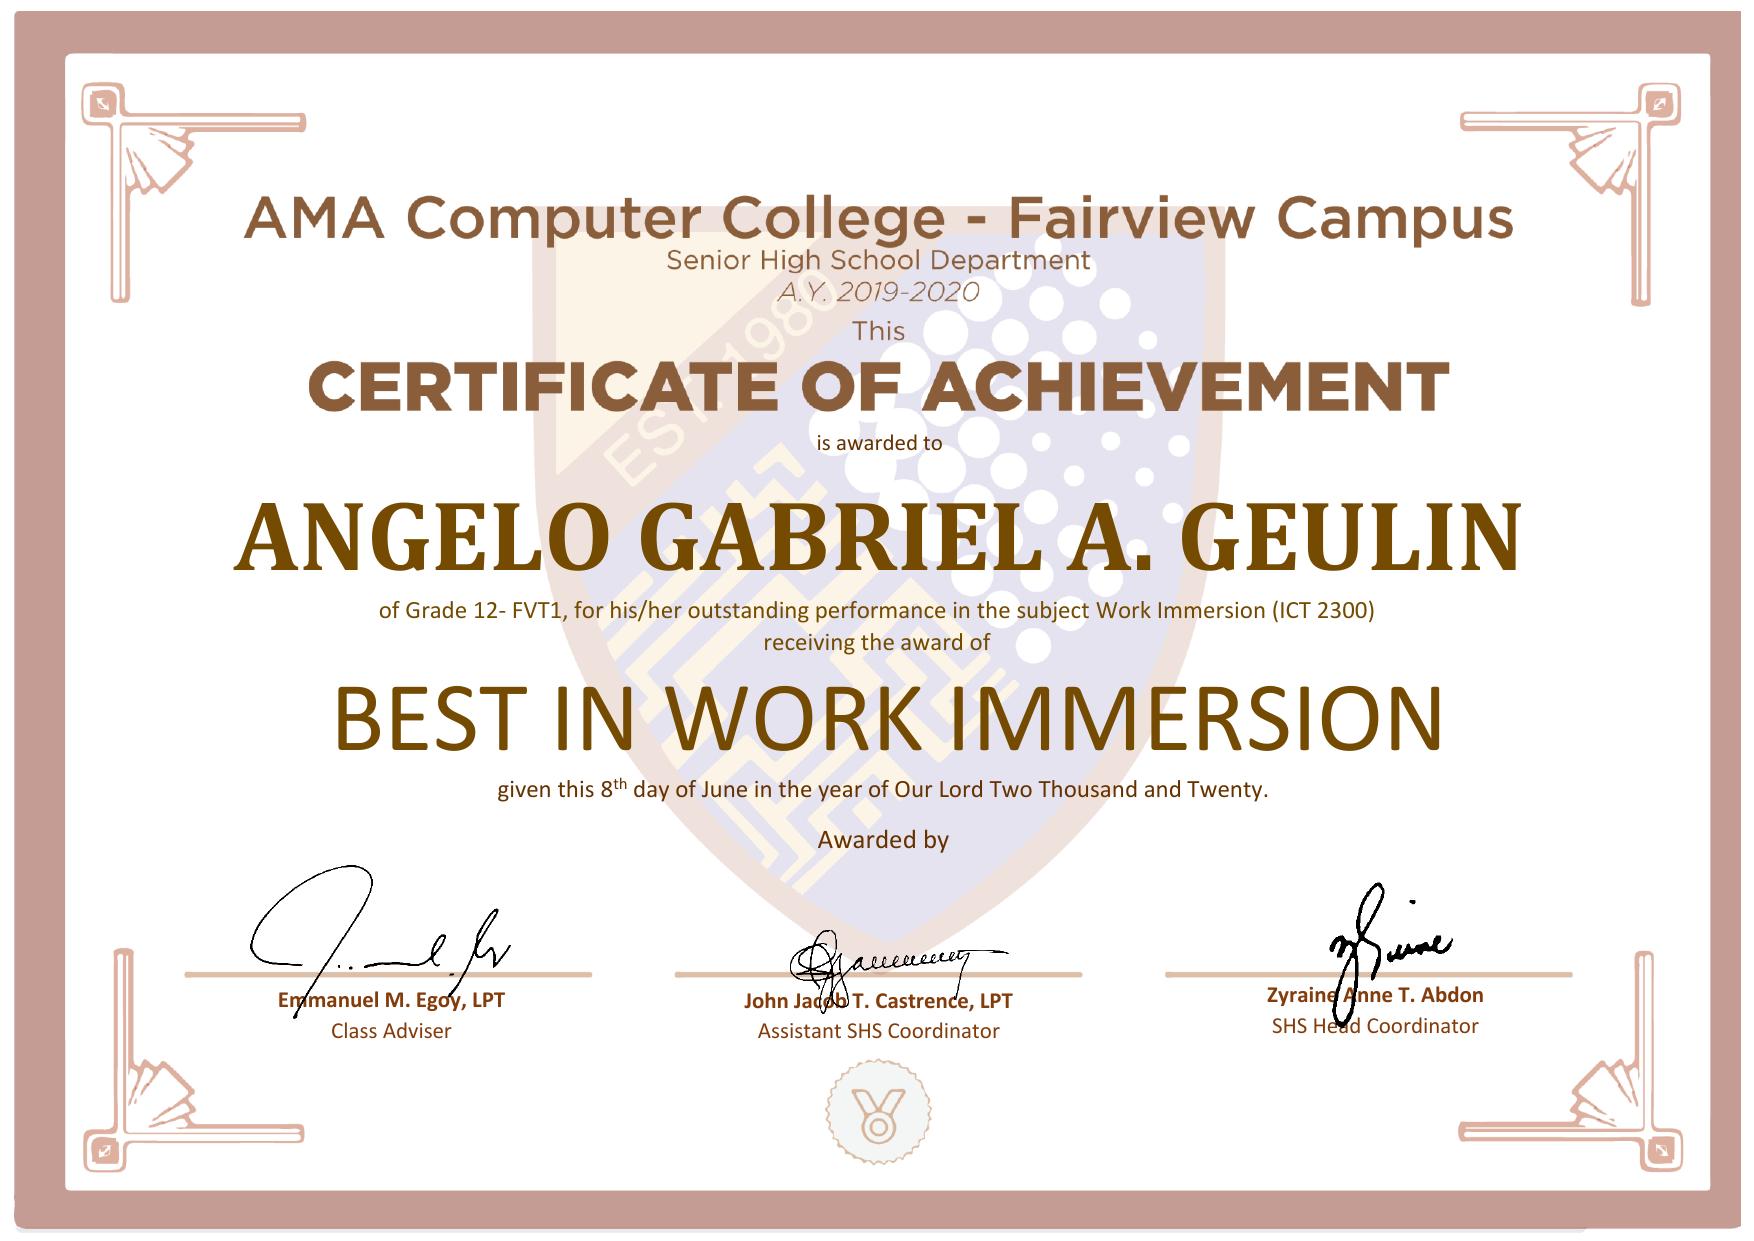 AMA Computer College Best in Work Immersion certificate